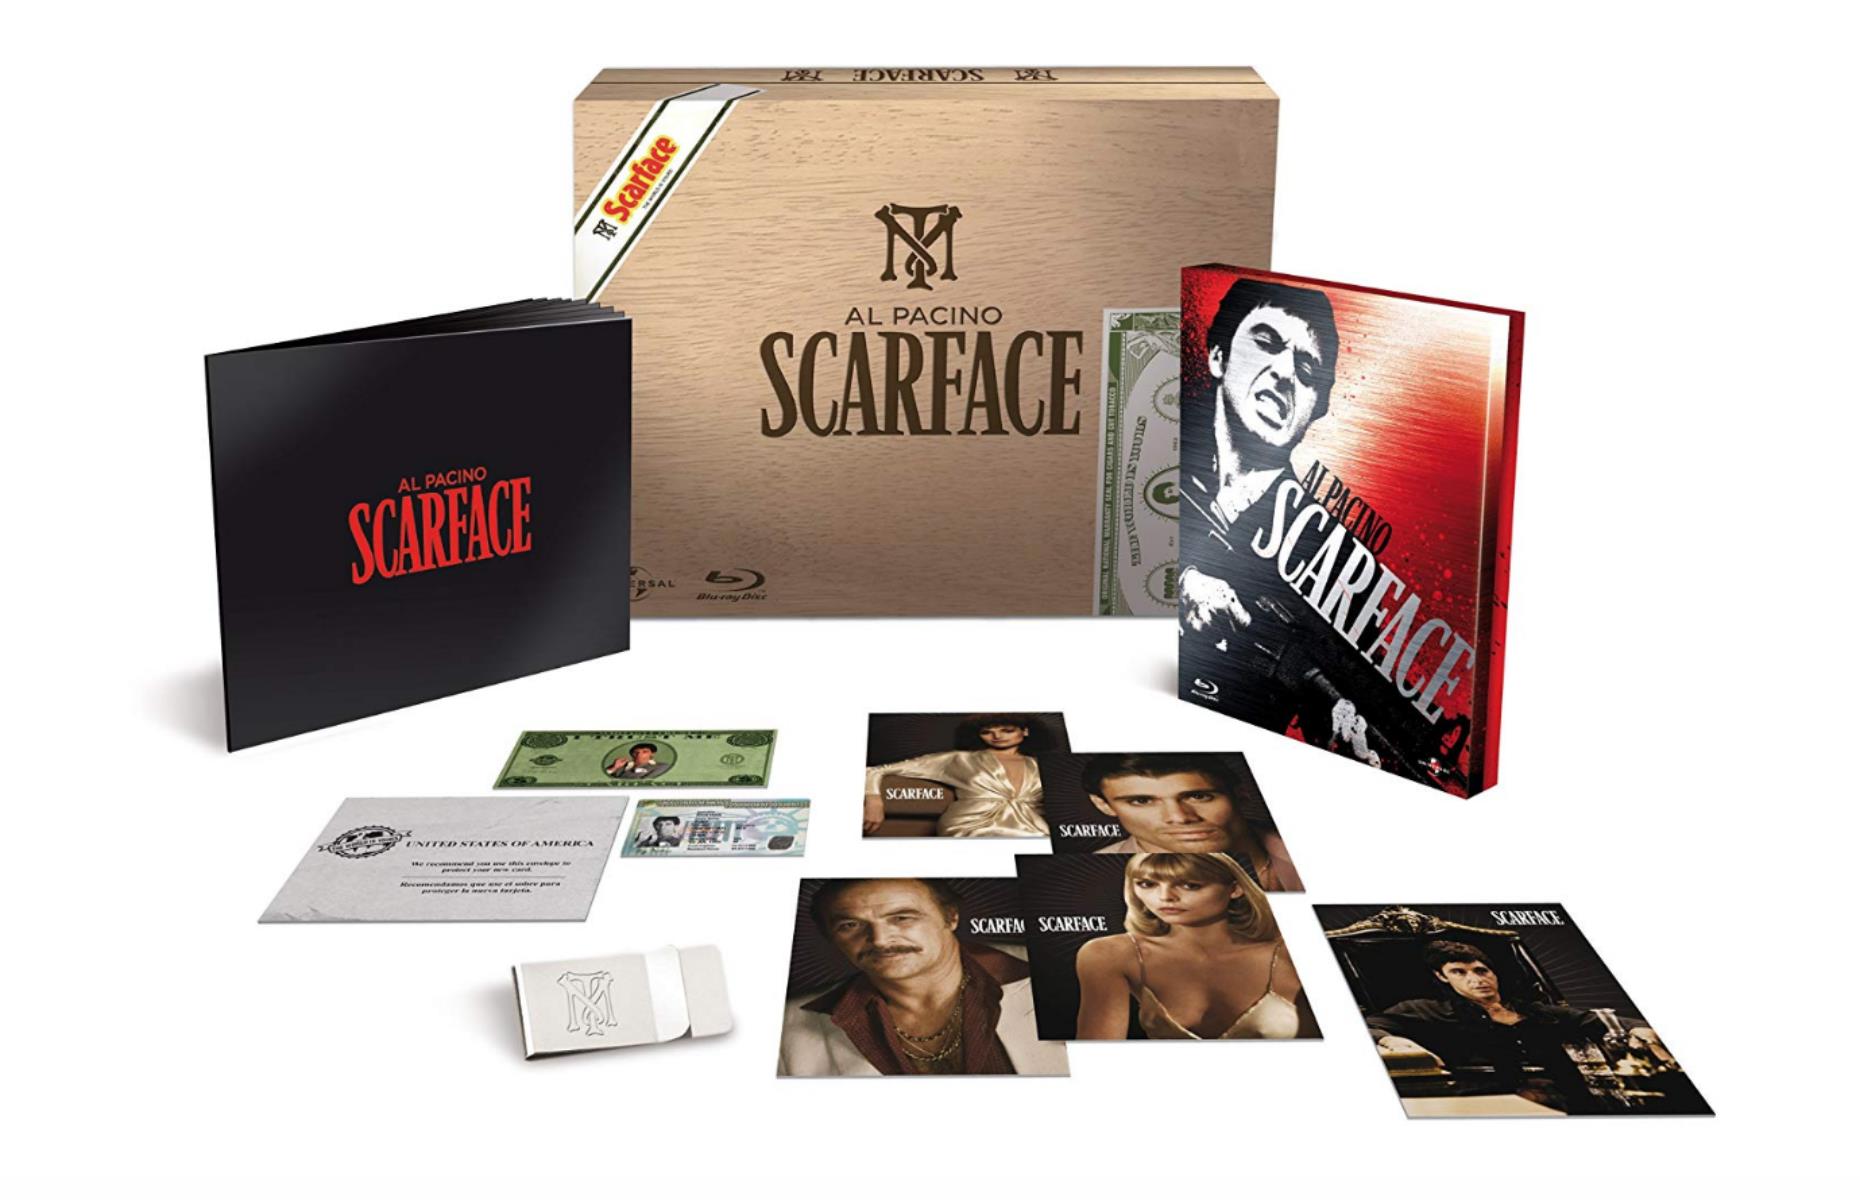 Scarface Limited Edition Blu-ray Box Set – up to $112 (£88)